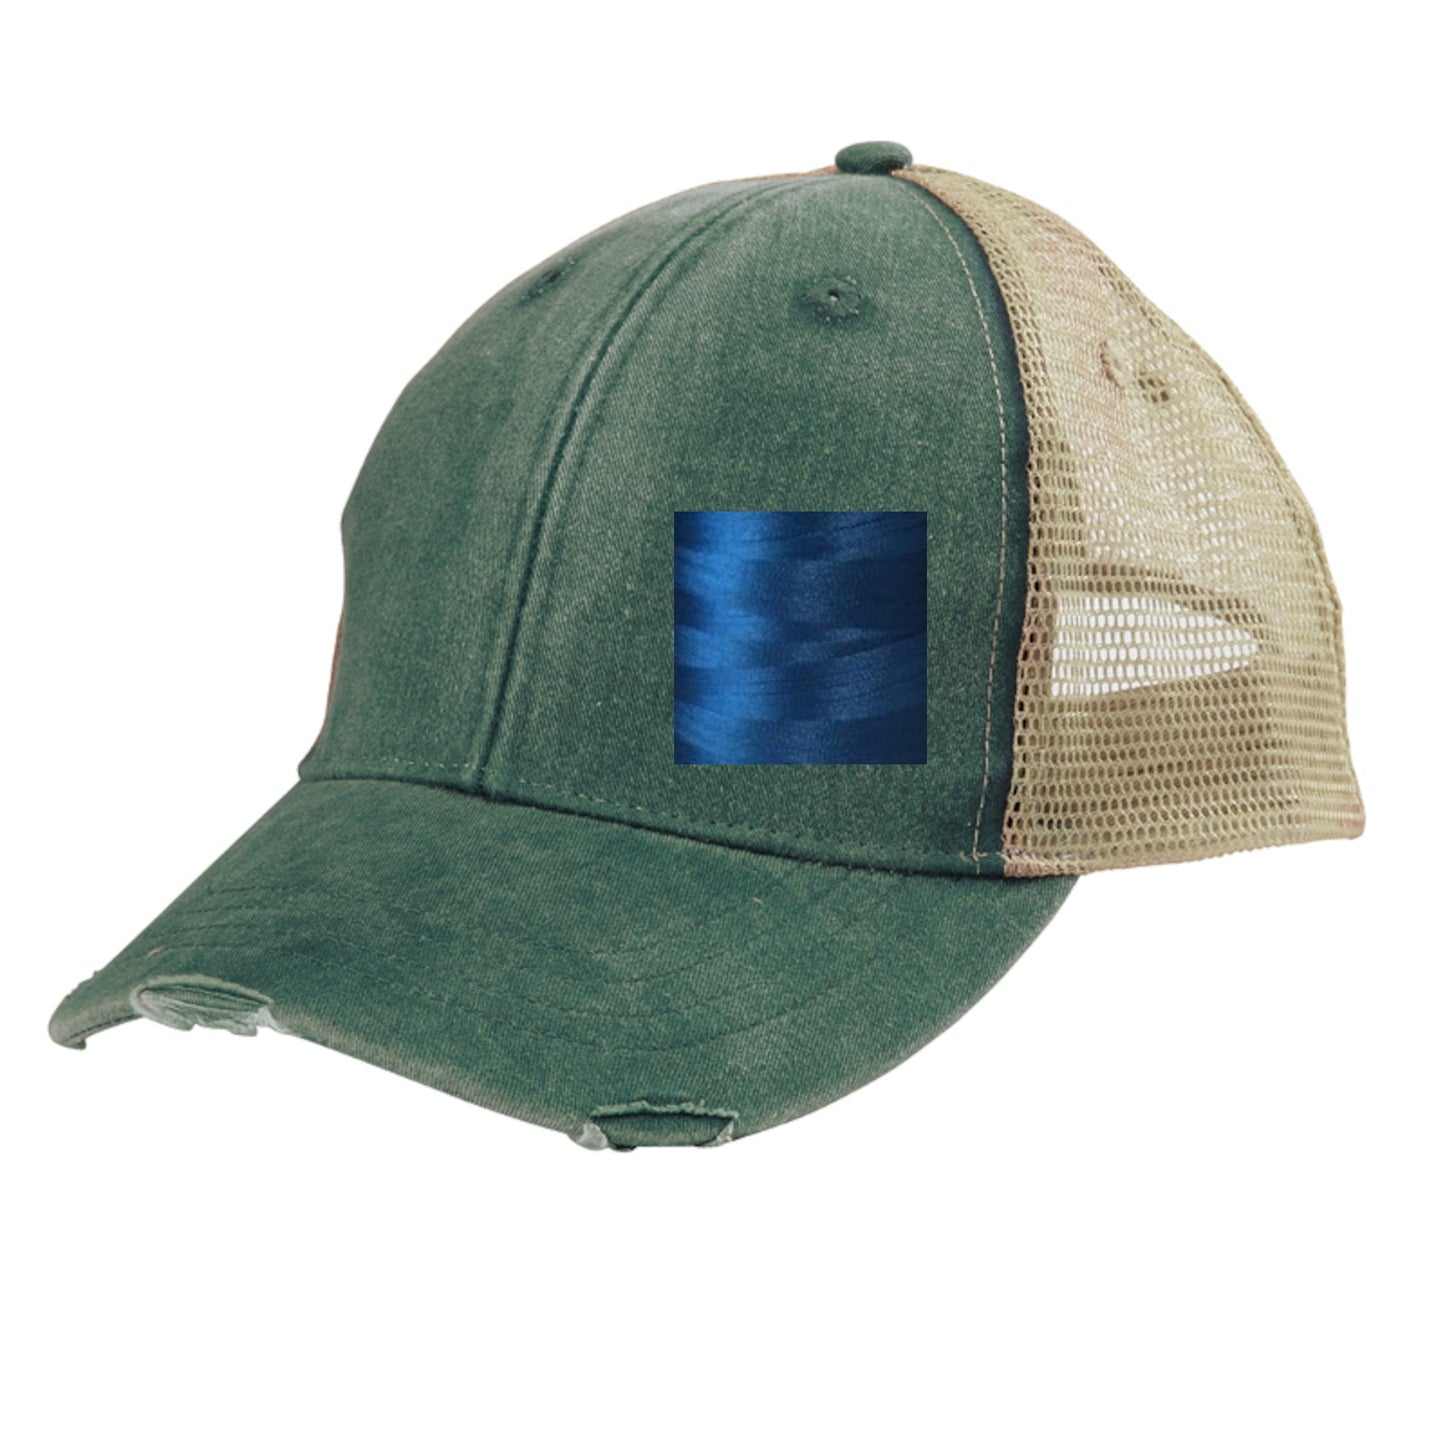 Vermont Hat | Distressed Snapback Trucker | state cap | many color choices